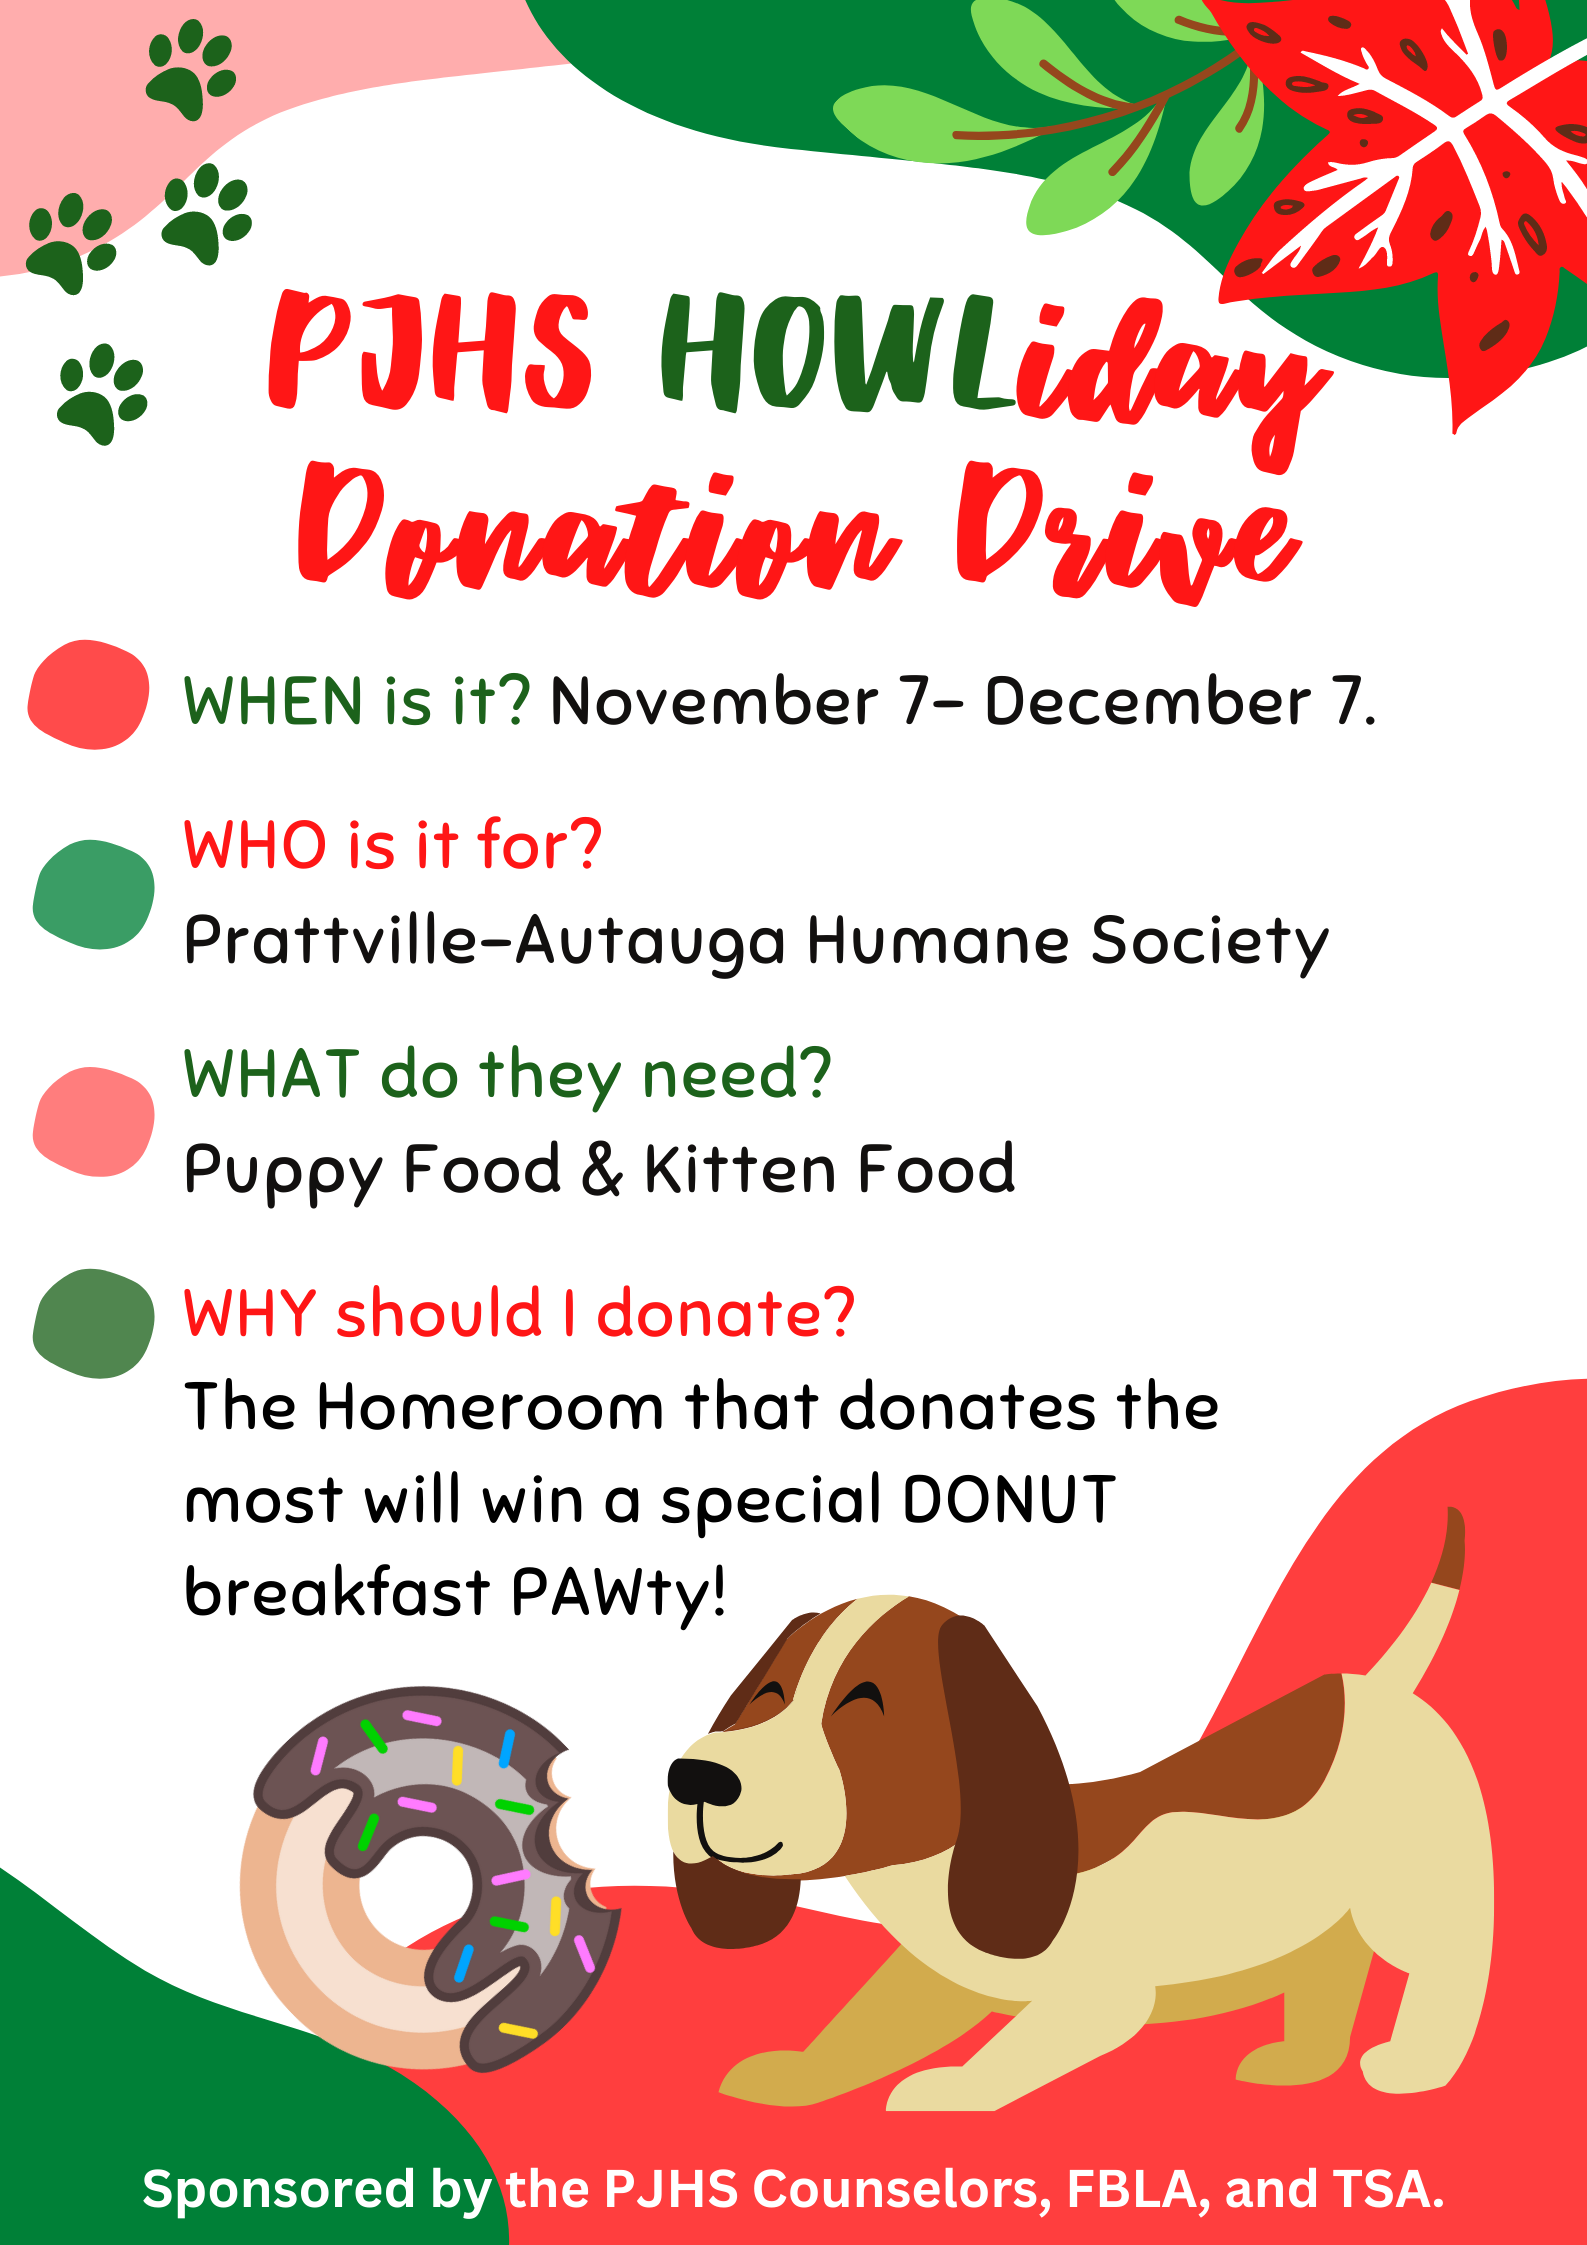 PJHS HOWLiday donation drive November 7 - December 7.  Collecting donations of kitten food and puppy food for the Prattville-Autauga Humane Society.  The Homeroom that donates the most gets a Donut Breakfast PAW-ty